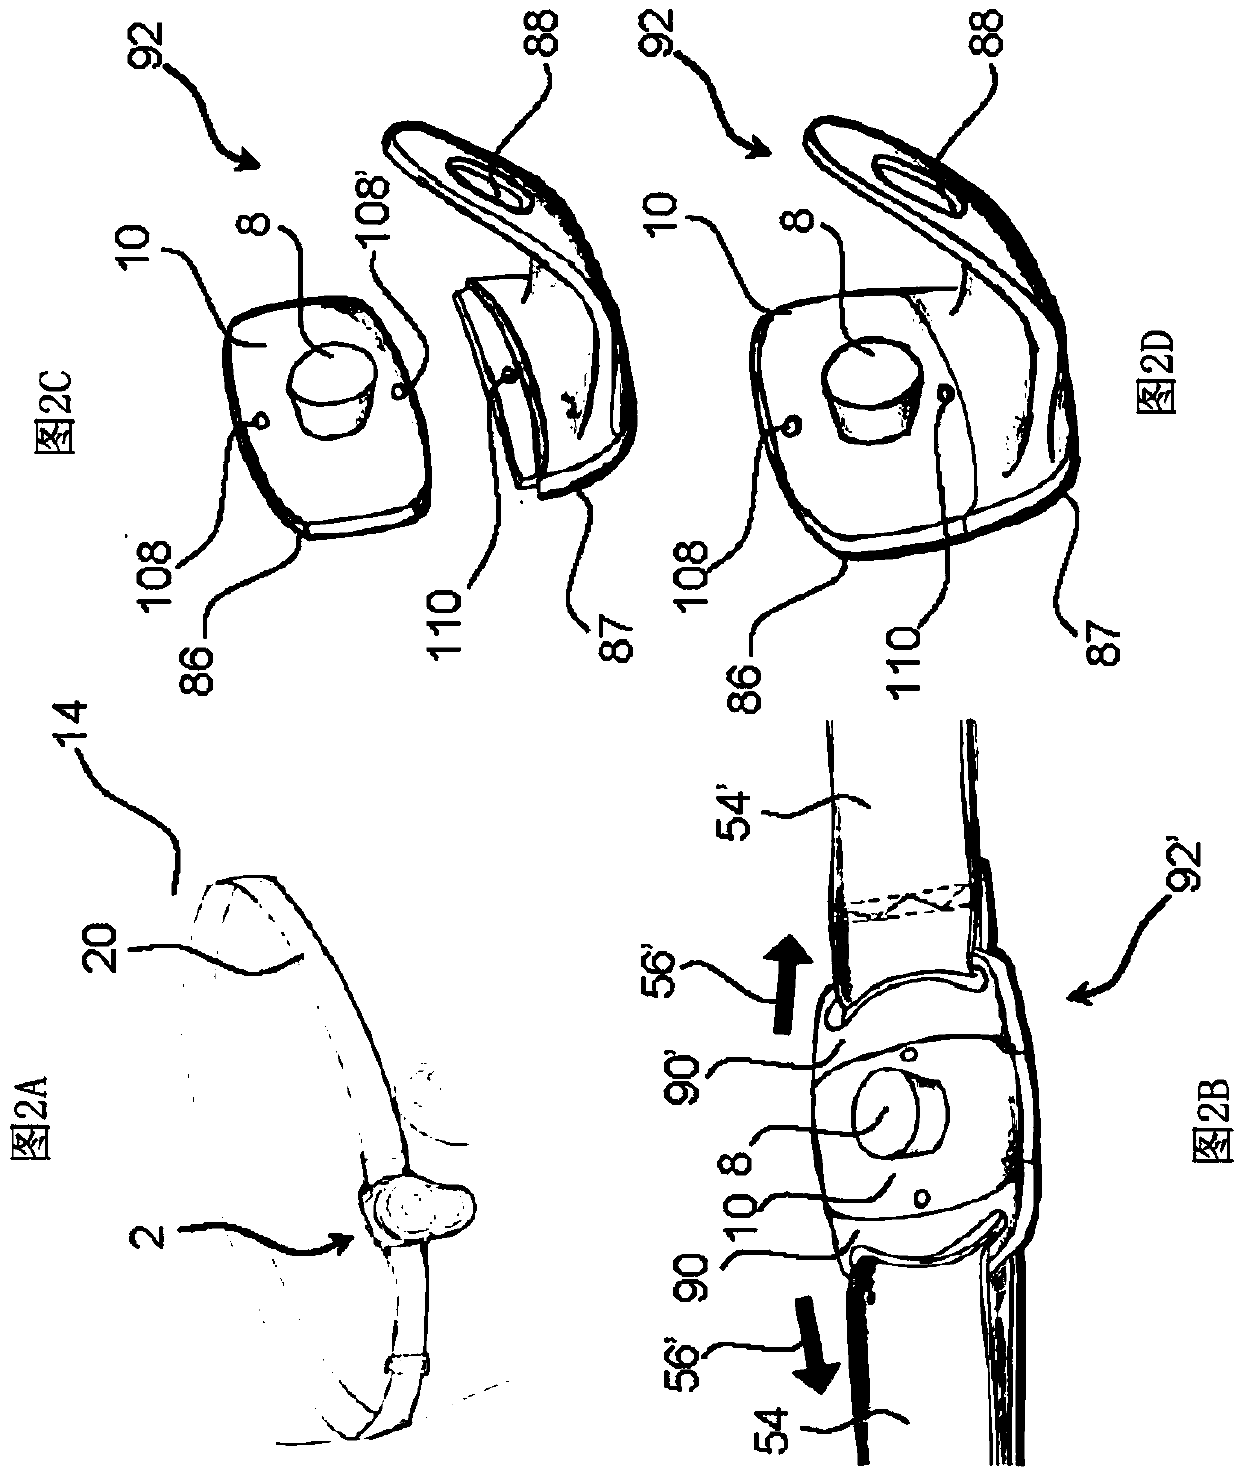 Mounting assembly for a bone conduction hearing device